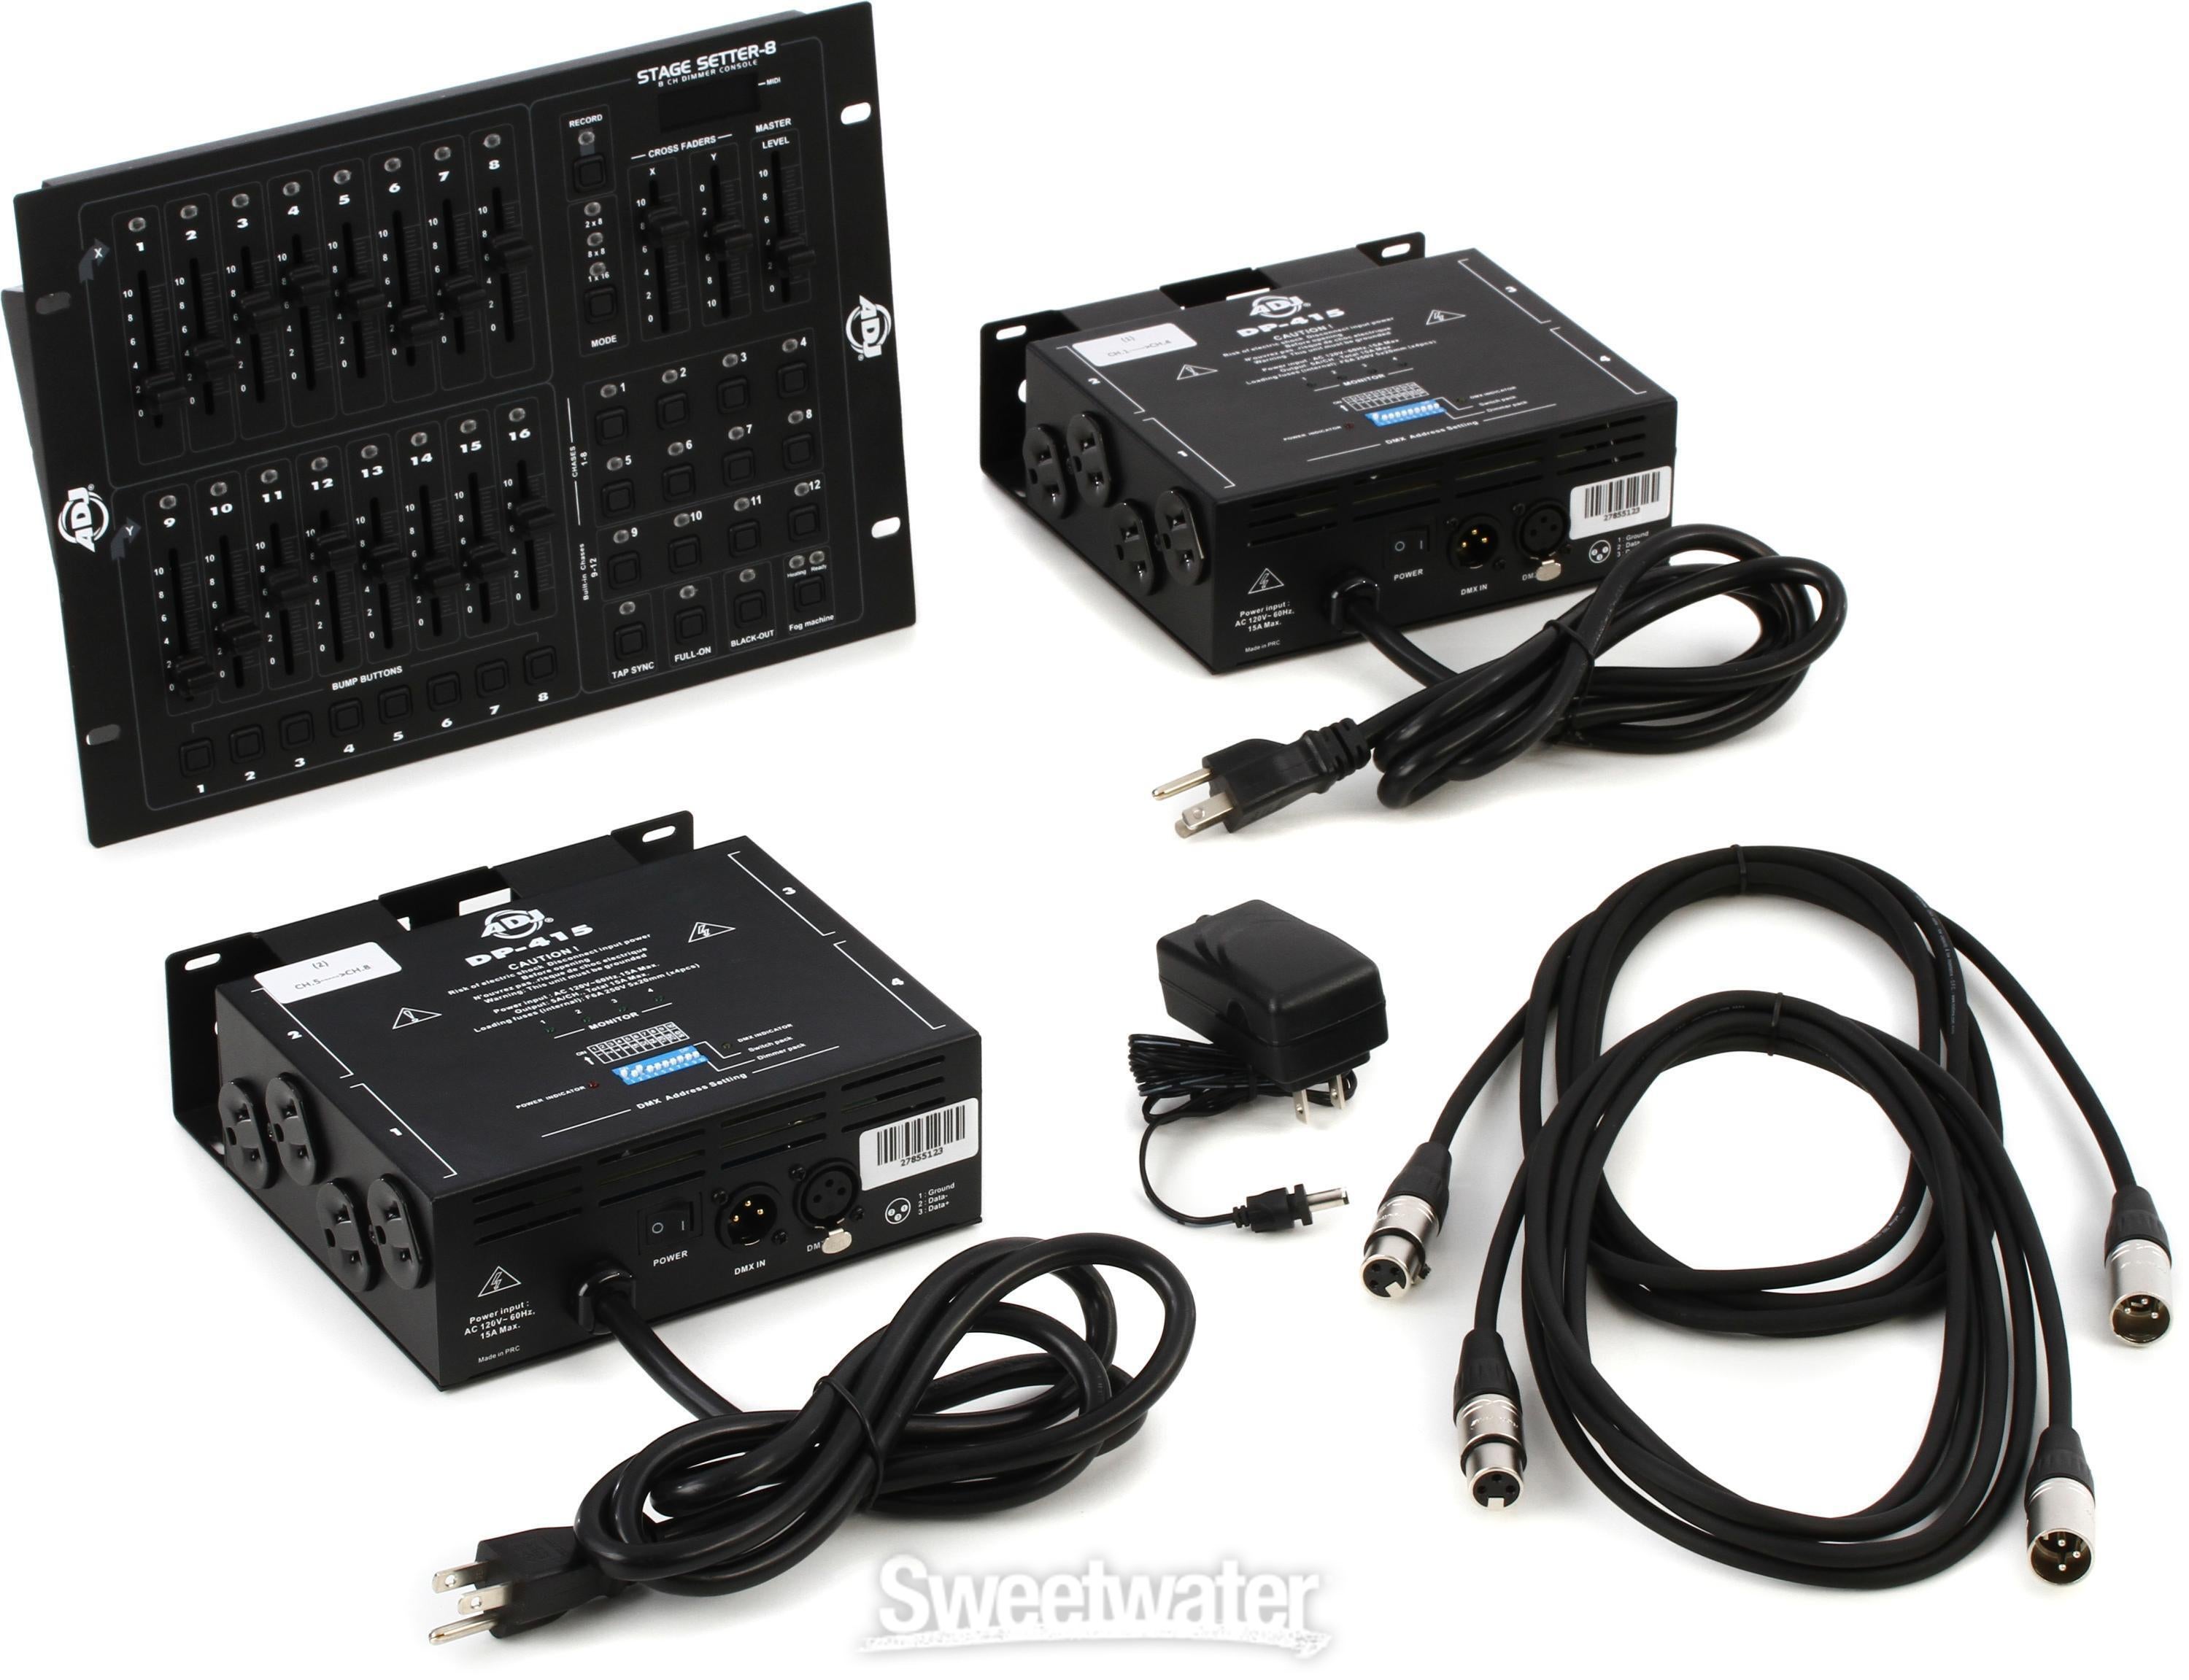 ADJ Stage Pak Lighting Controller Package with Stage Setter-8 and Two  DP-415 Dimmer Packs Sweetwater